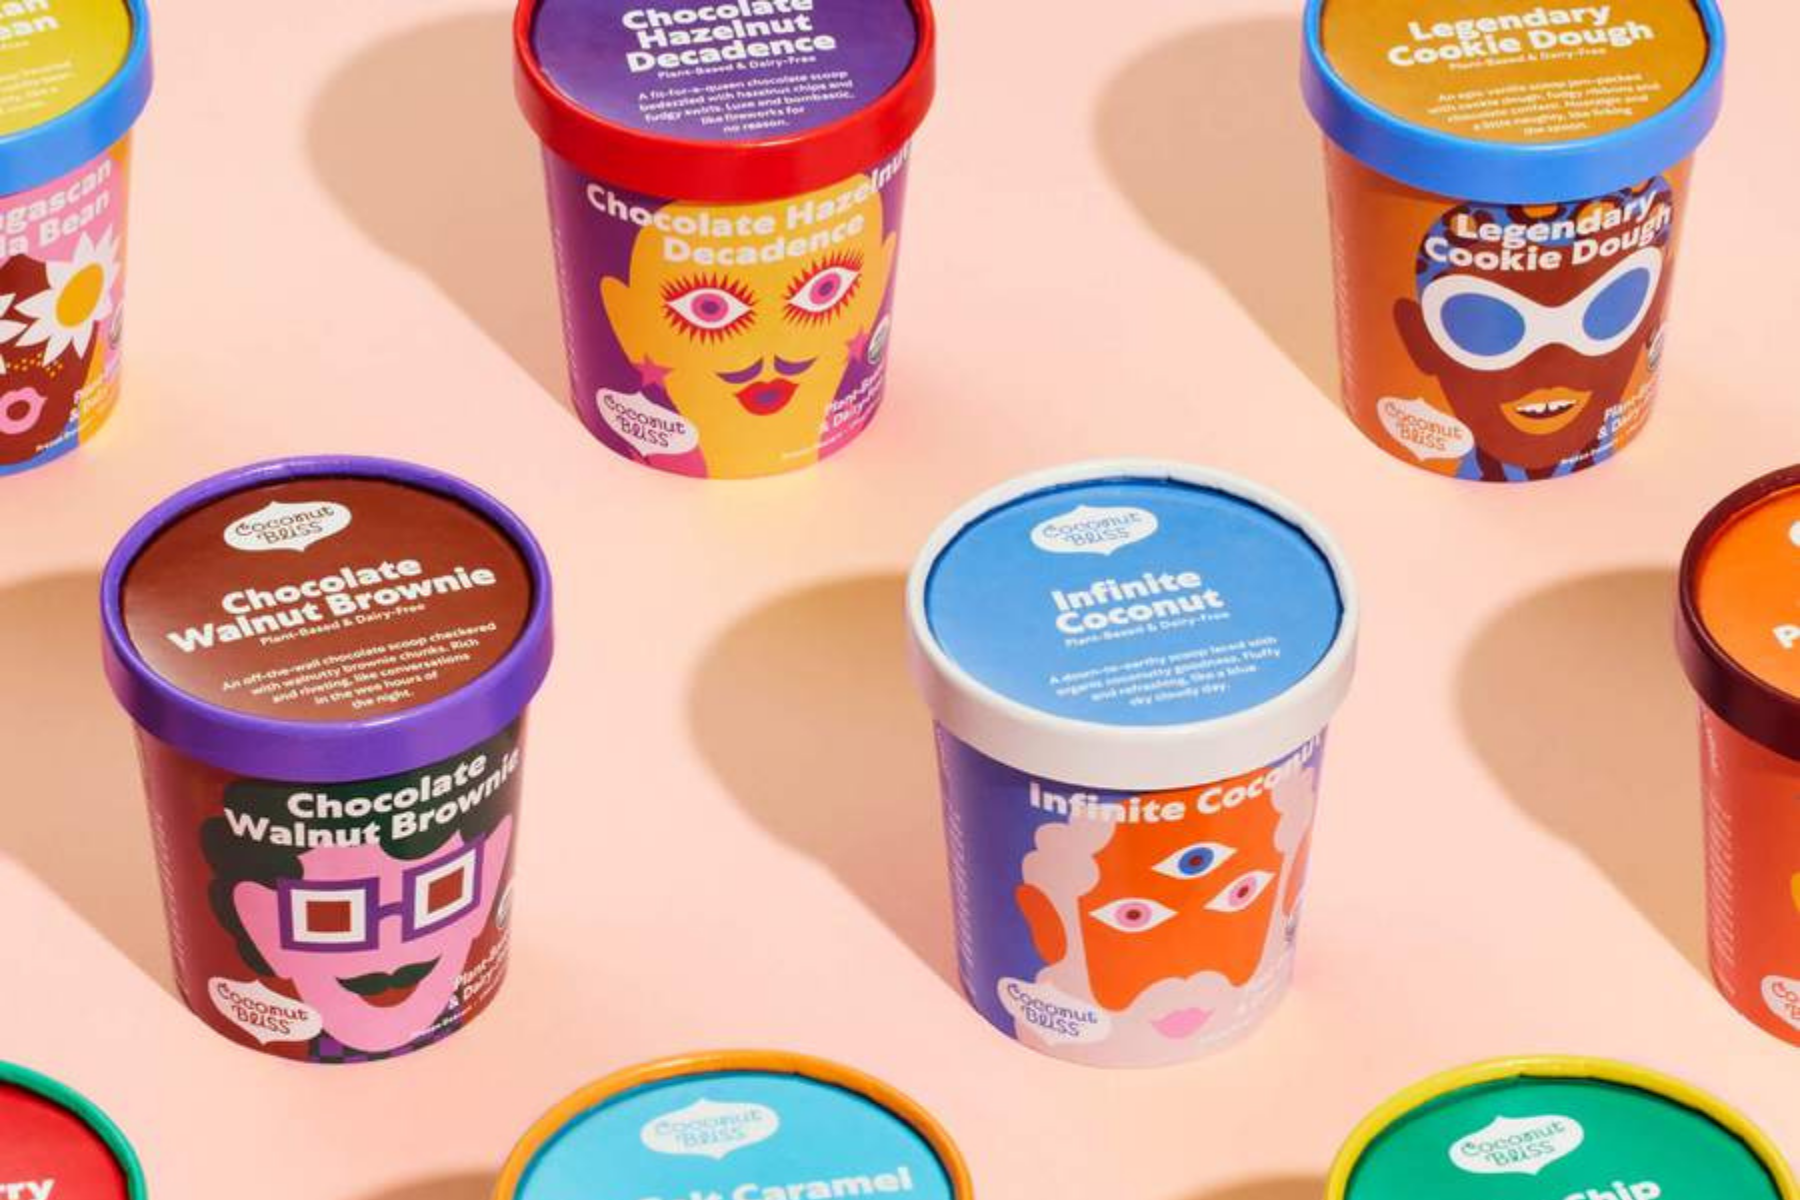 A variety of brightly colored Coconut Bliss ice cream pints